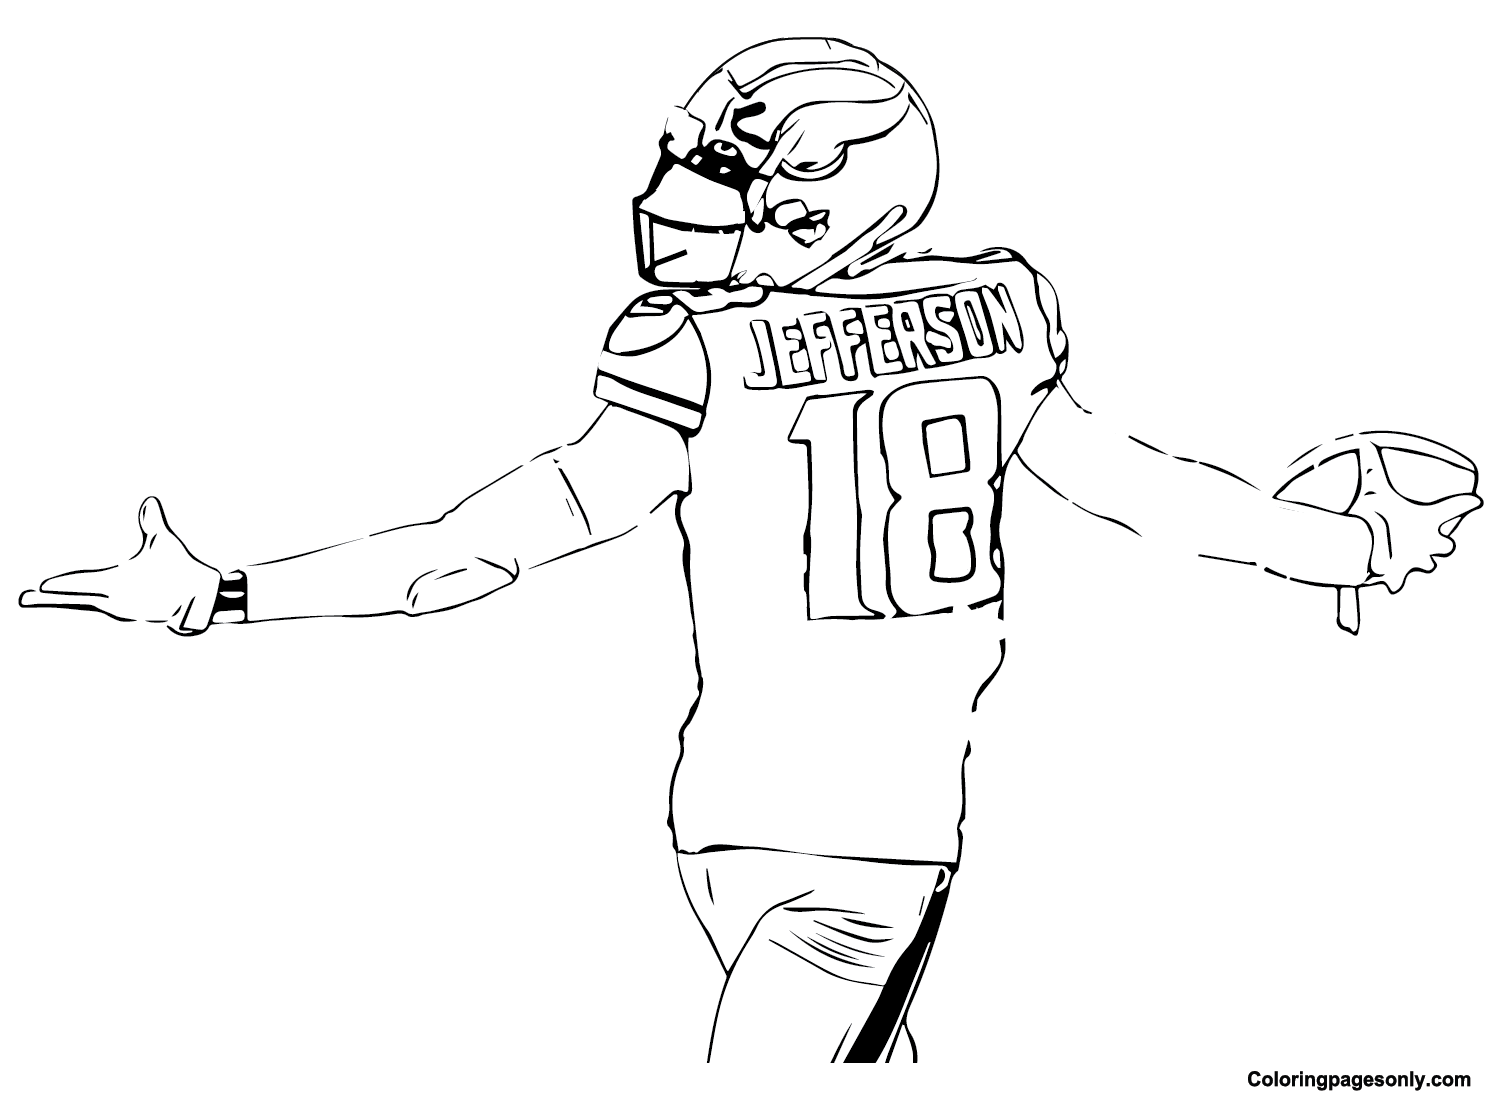 Justin Jefferson Printable Coloring Pages - Justin Jefferson Coloring Pages  - Coloring Pages For Kids And Adults